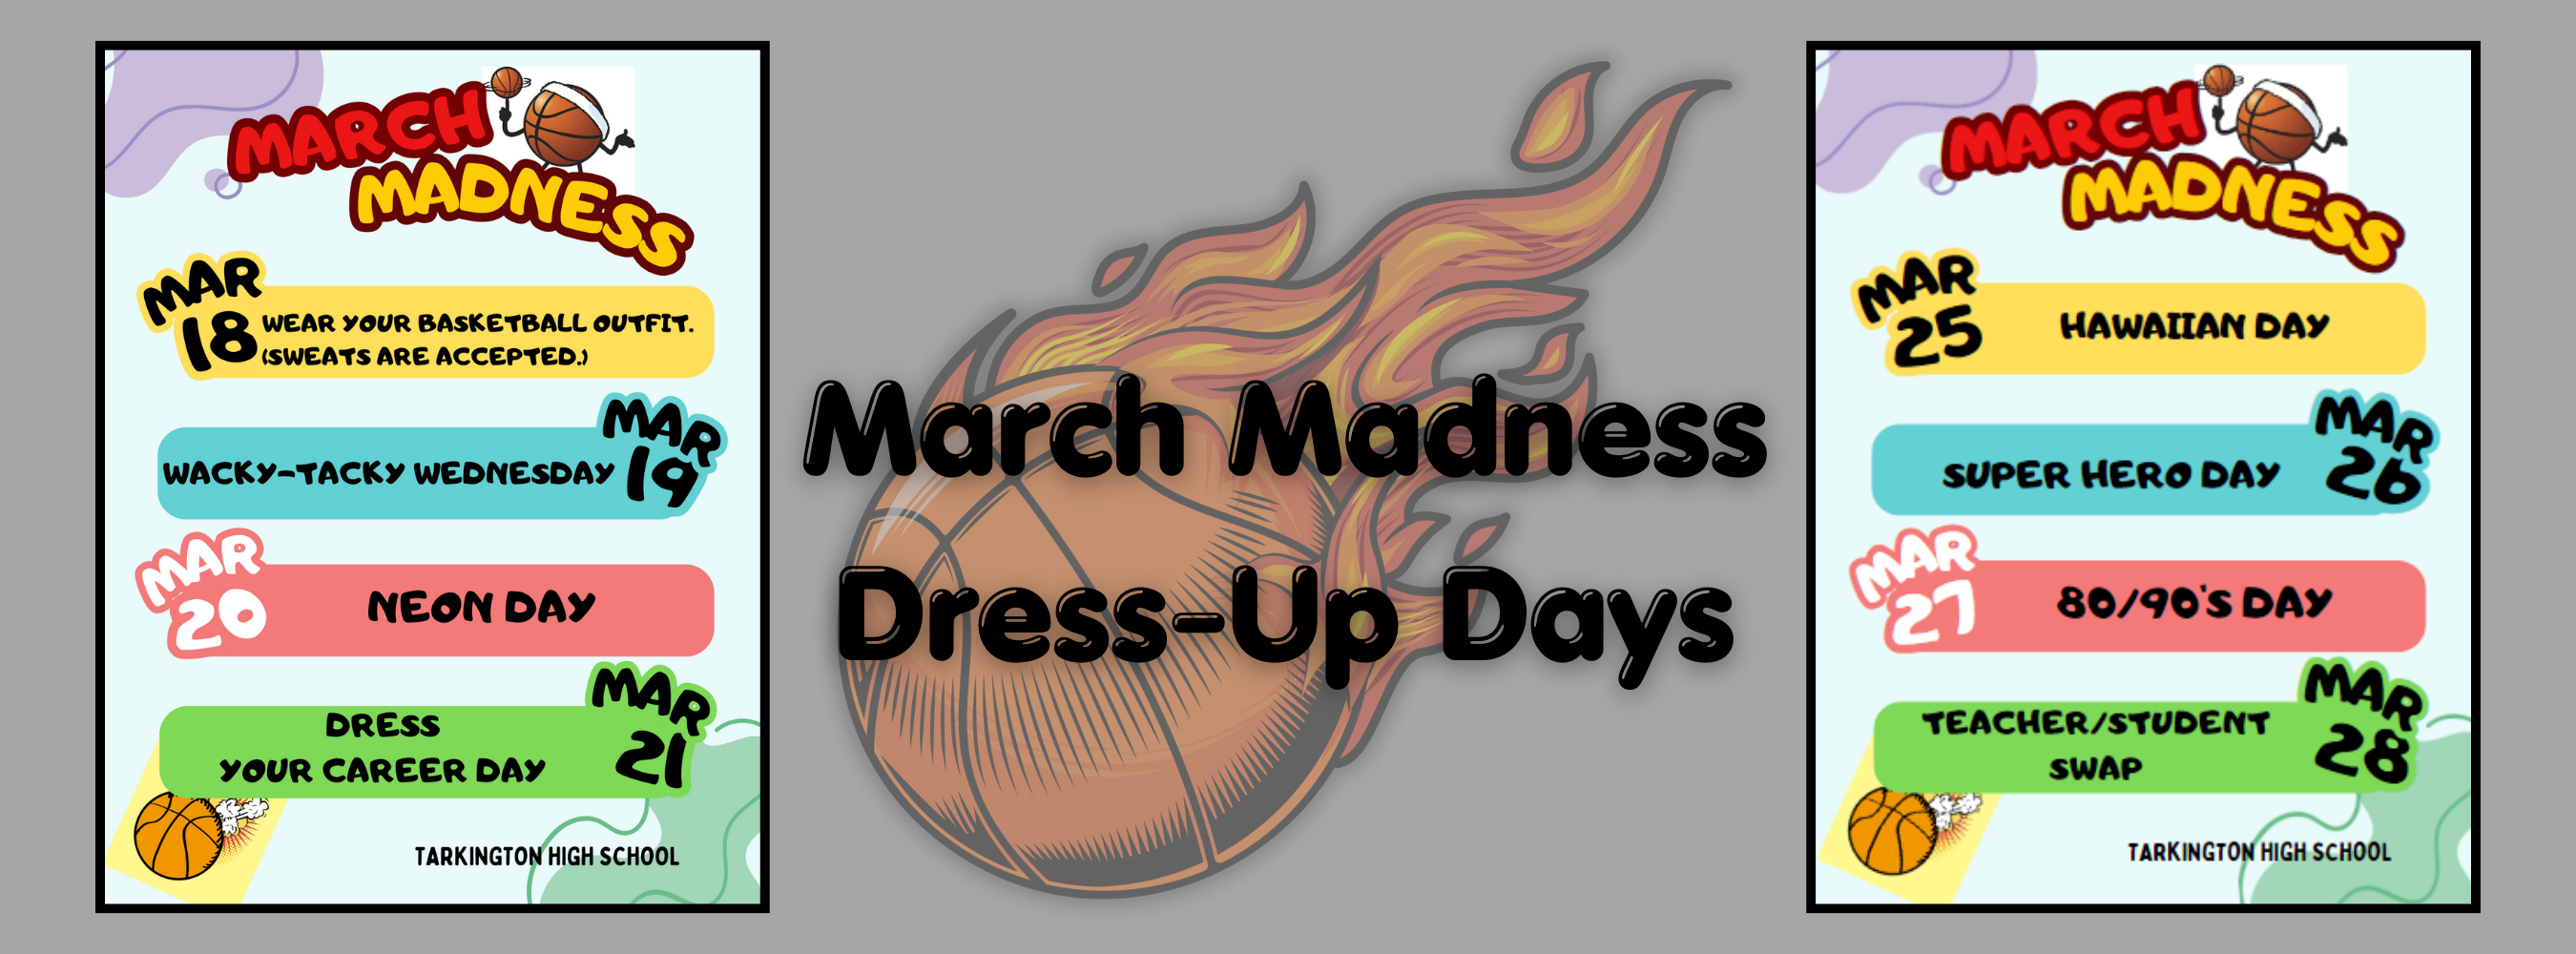 THS March Madness Dress Up Days